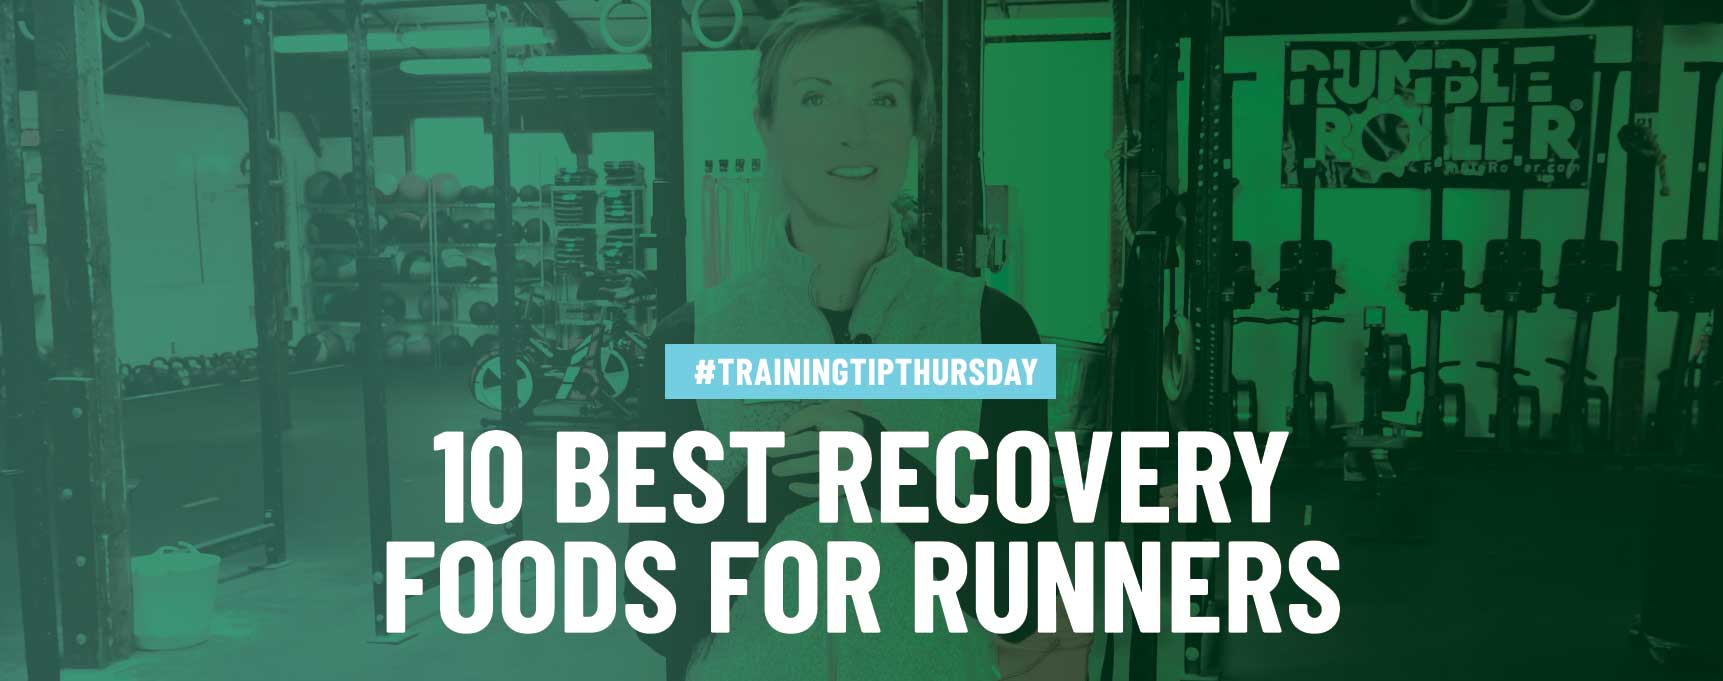 #TrainingTipThursday: 10 Best Recovery Foods for Runners